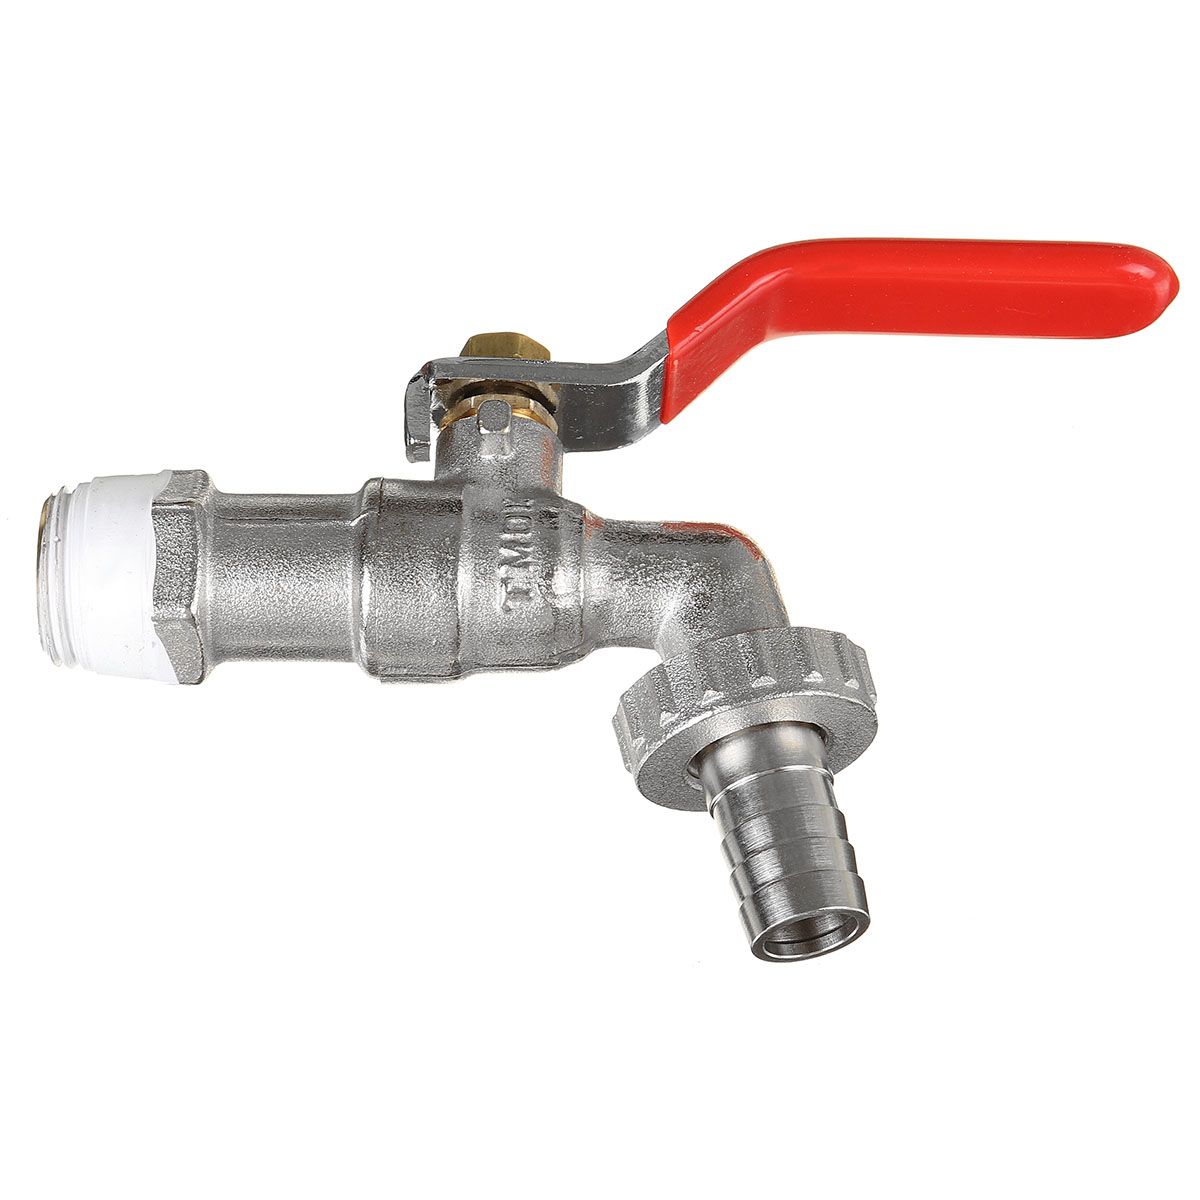 12-Inch-S60x6-IBC-Water-Tank-Adapter-Tap-Outlet-Replacement-Valve-Fitting-for-Garden-Water-Connector-1667222